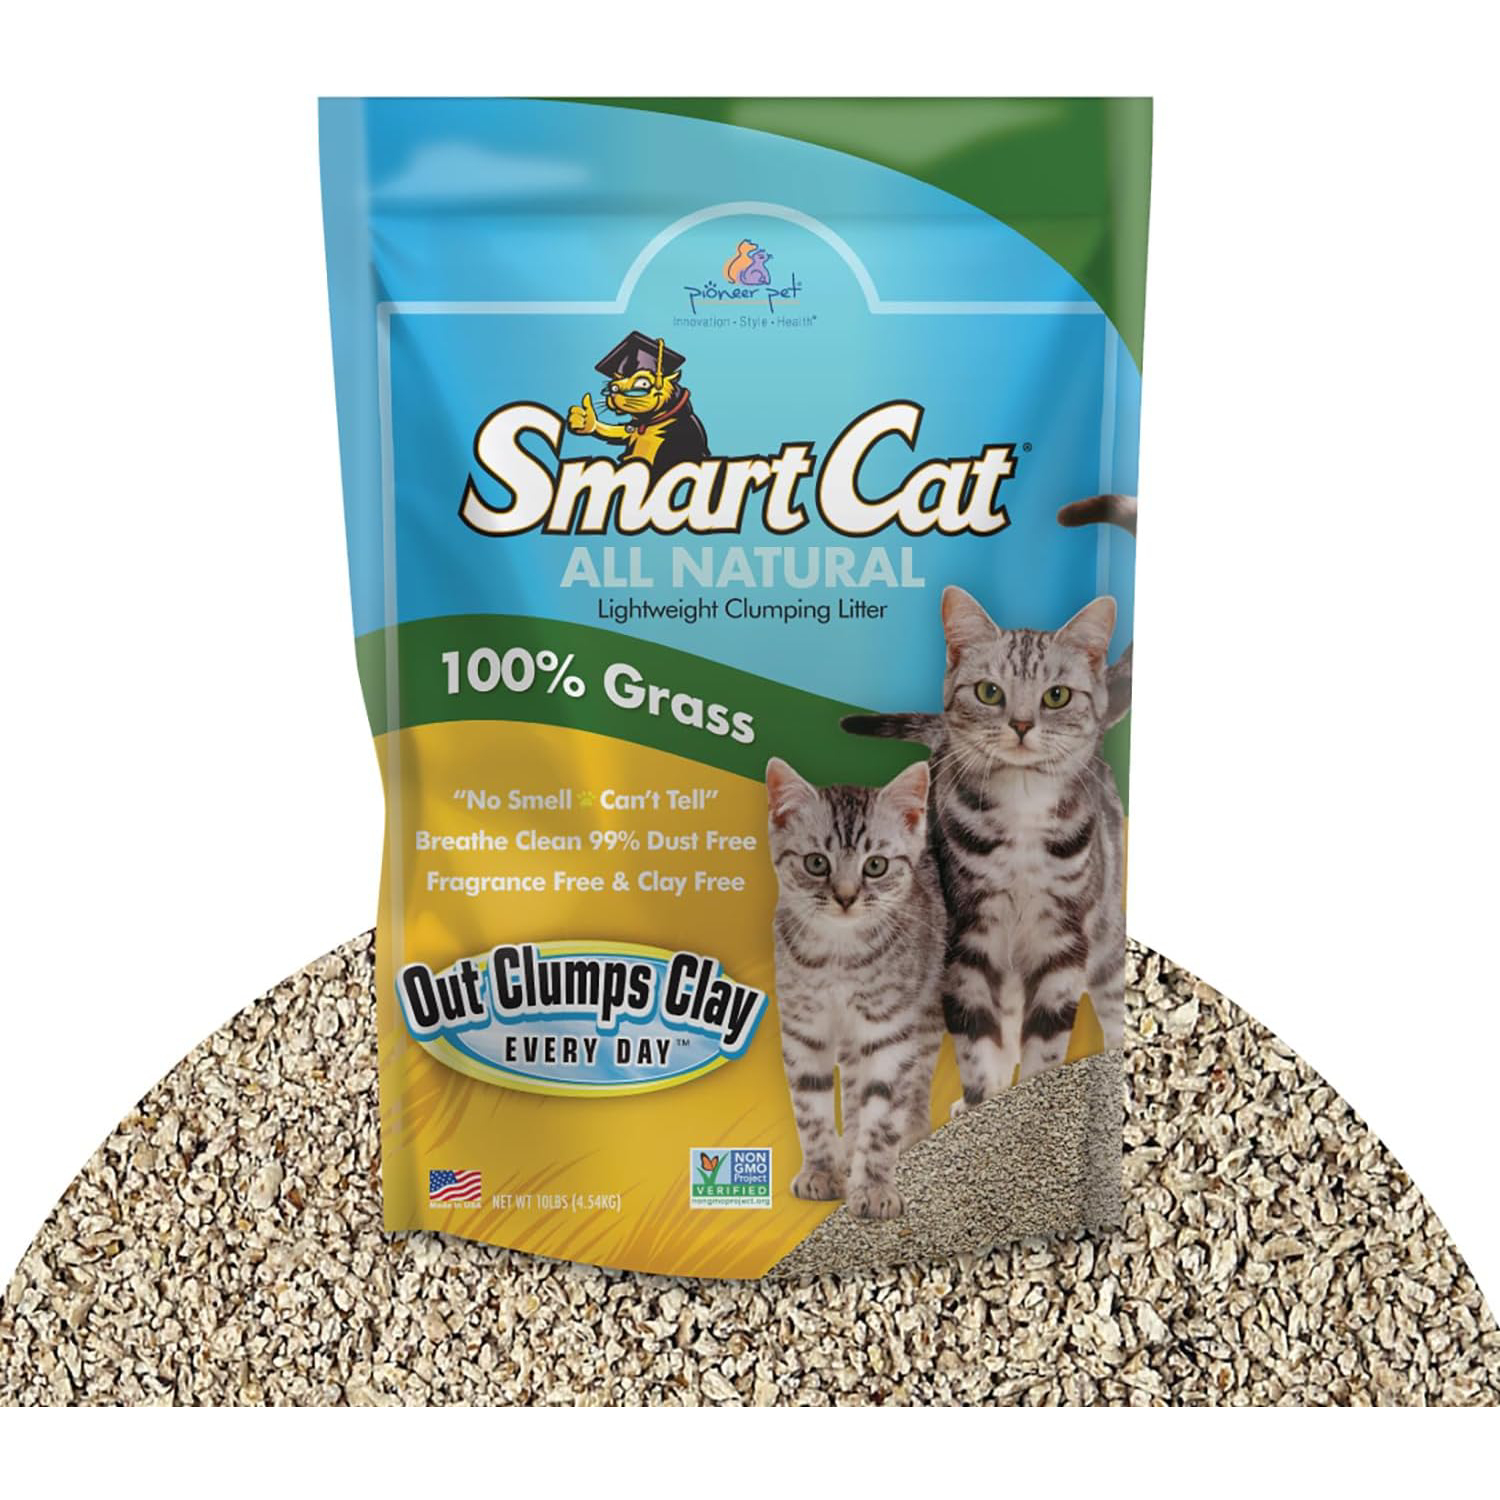 All Natural Clumping Cat Litter, 10 Pound (160oz 1 Pack) - Alternative to Clay and Pellet Litter - Chemical and 99% Dust Free - Unscented and Lightweight New